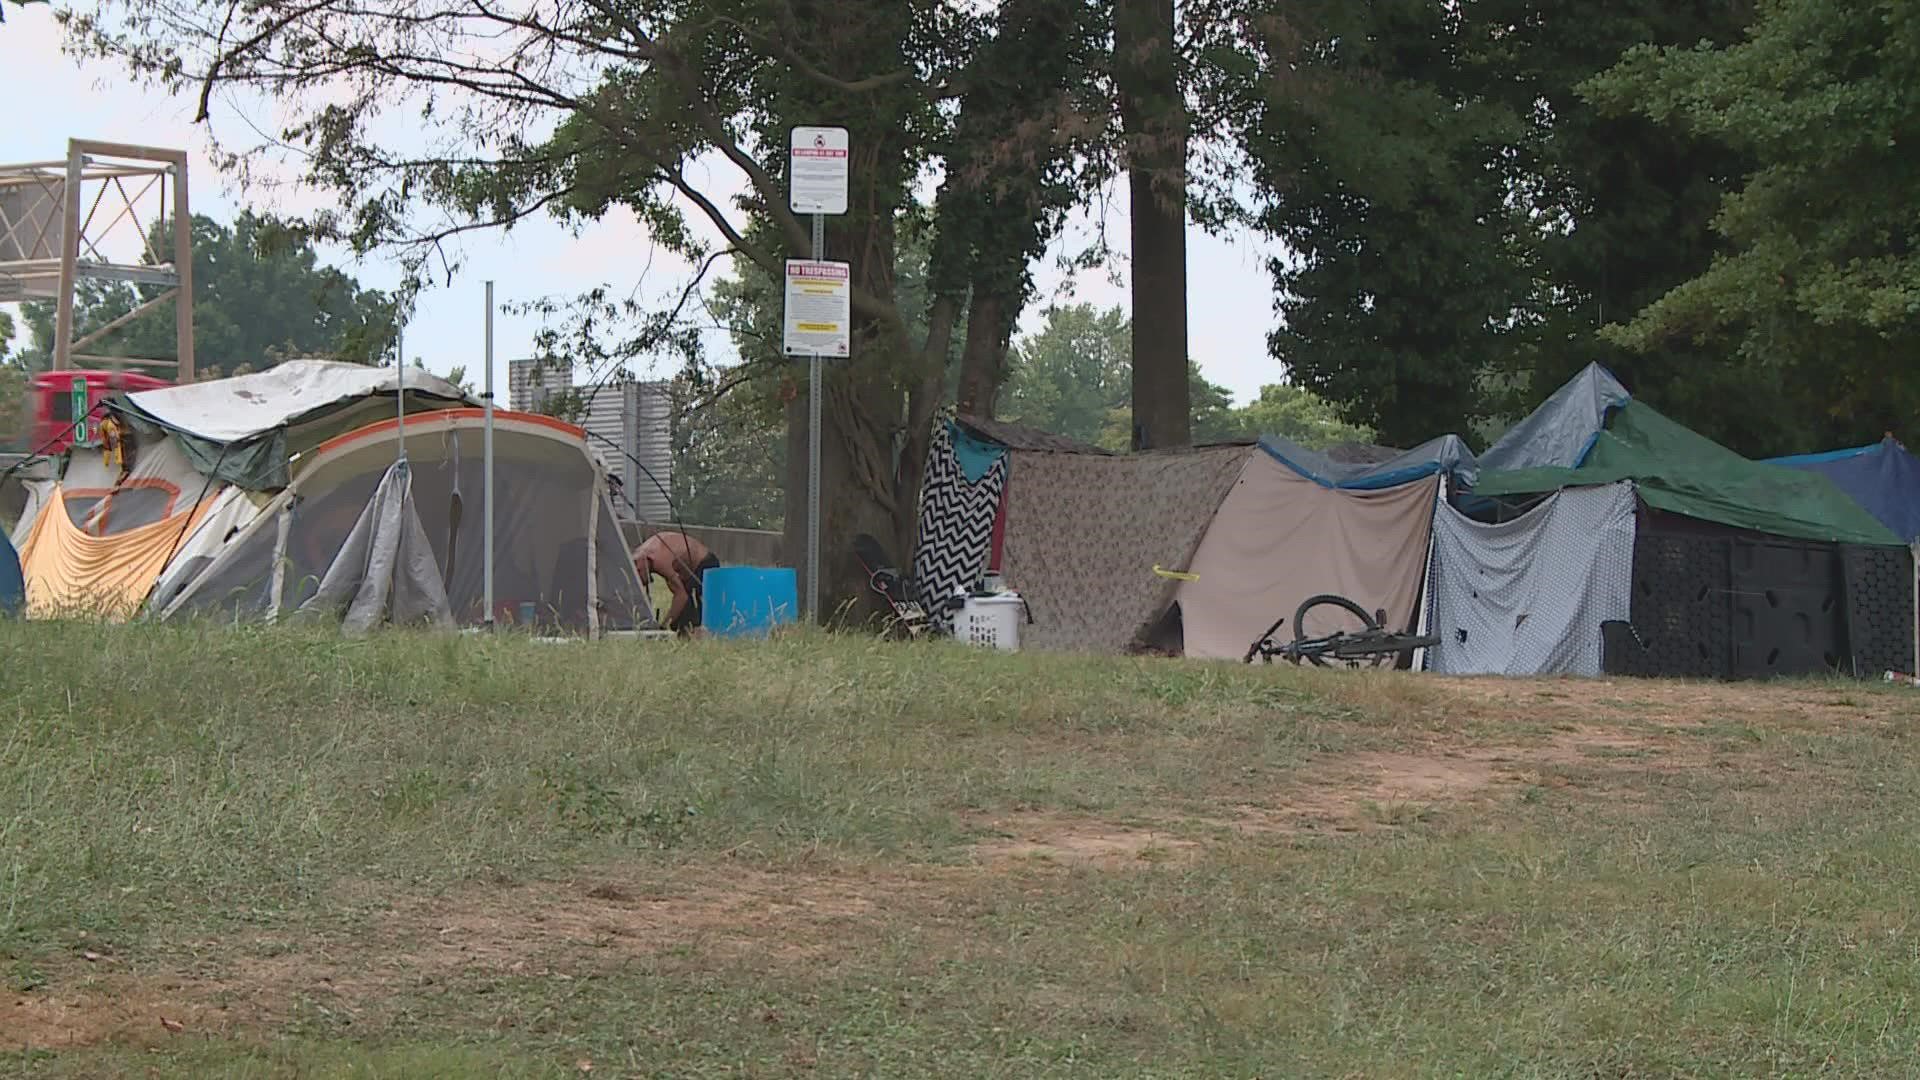 The city gave their first 24 hour clearing notice after resuming risk assessments for those living in homeless camps.